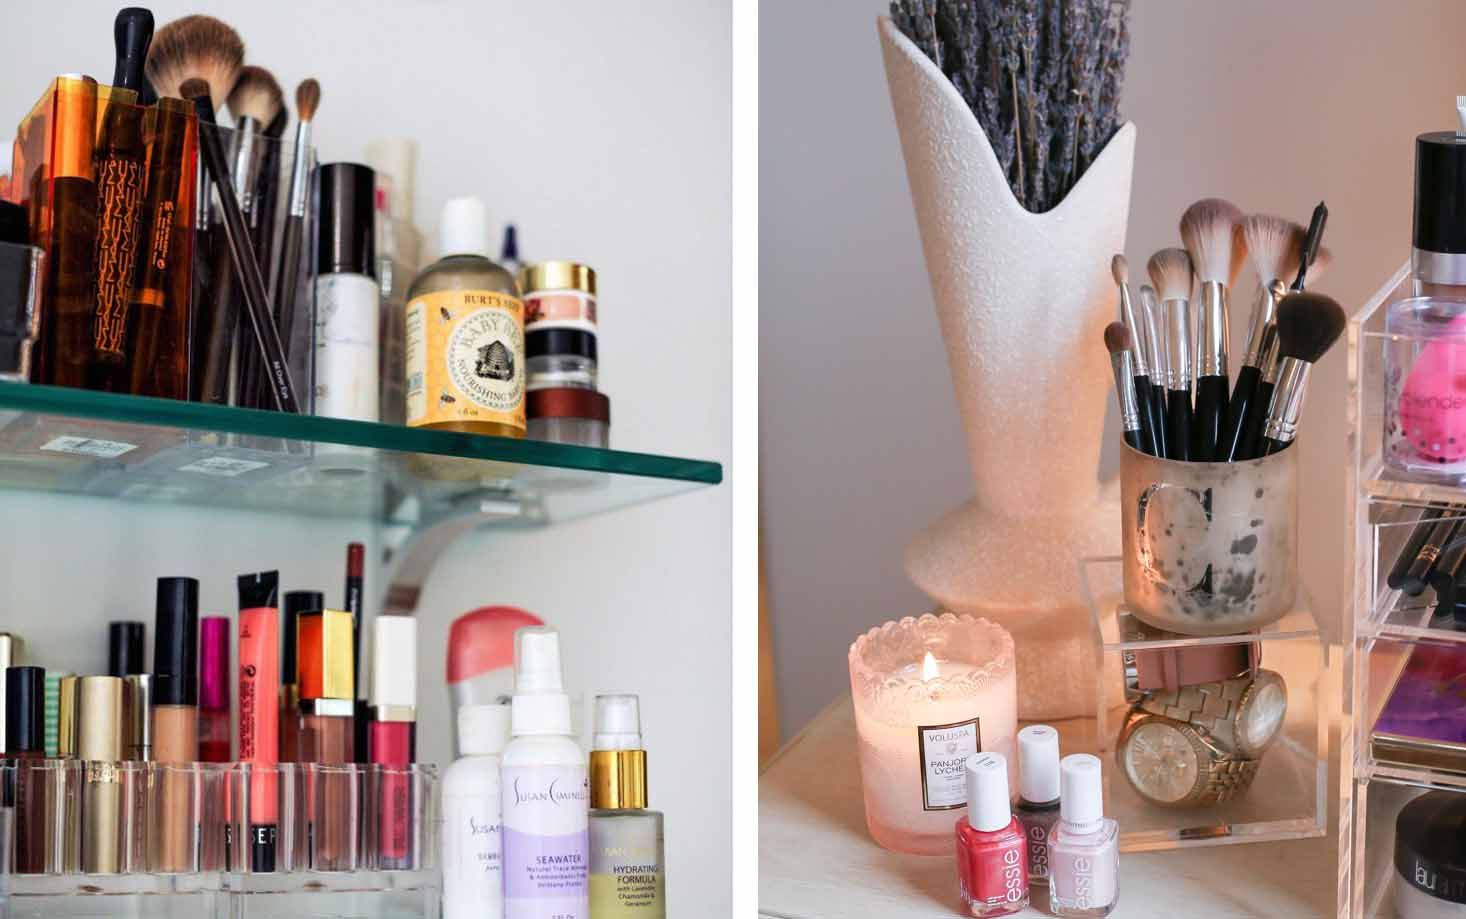 Makeup Organizer Ideas 7 Makeup Storage Ideas and Containers